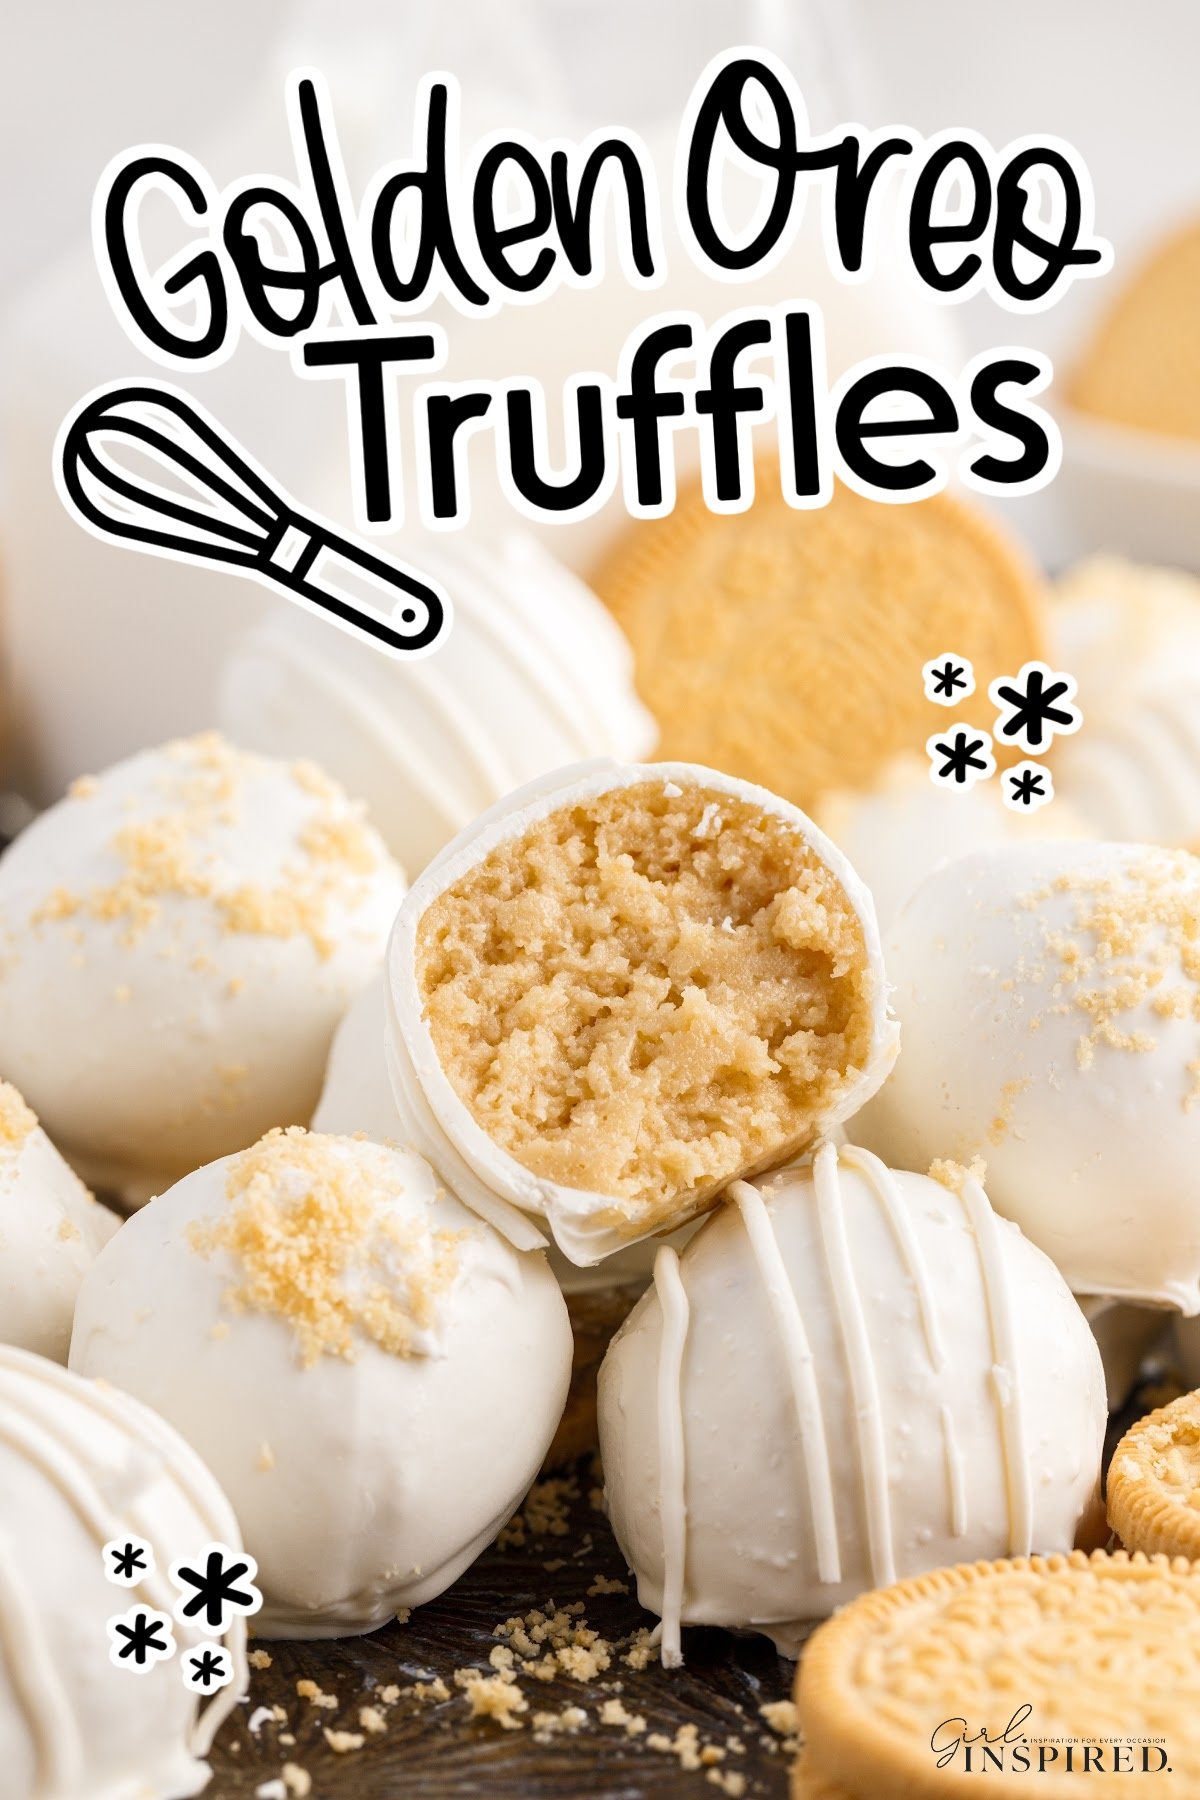 Golden Oreo Truffles one opened with text overlay.